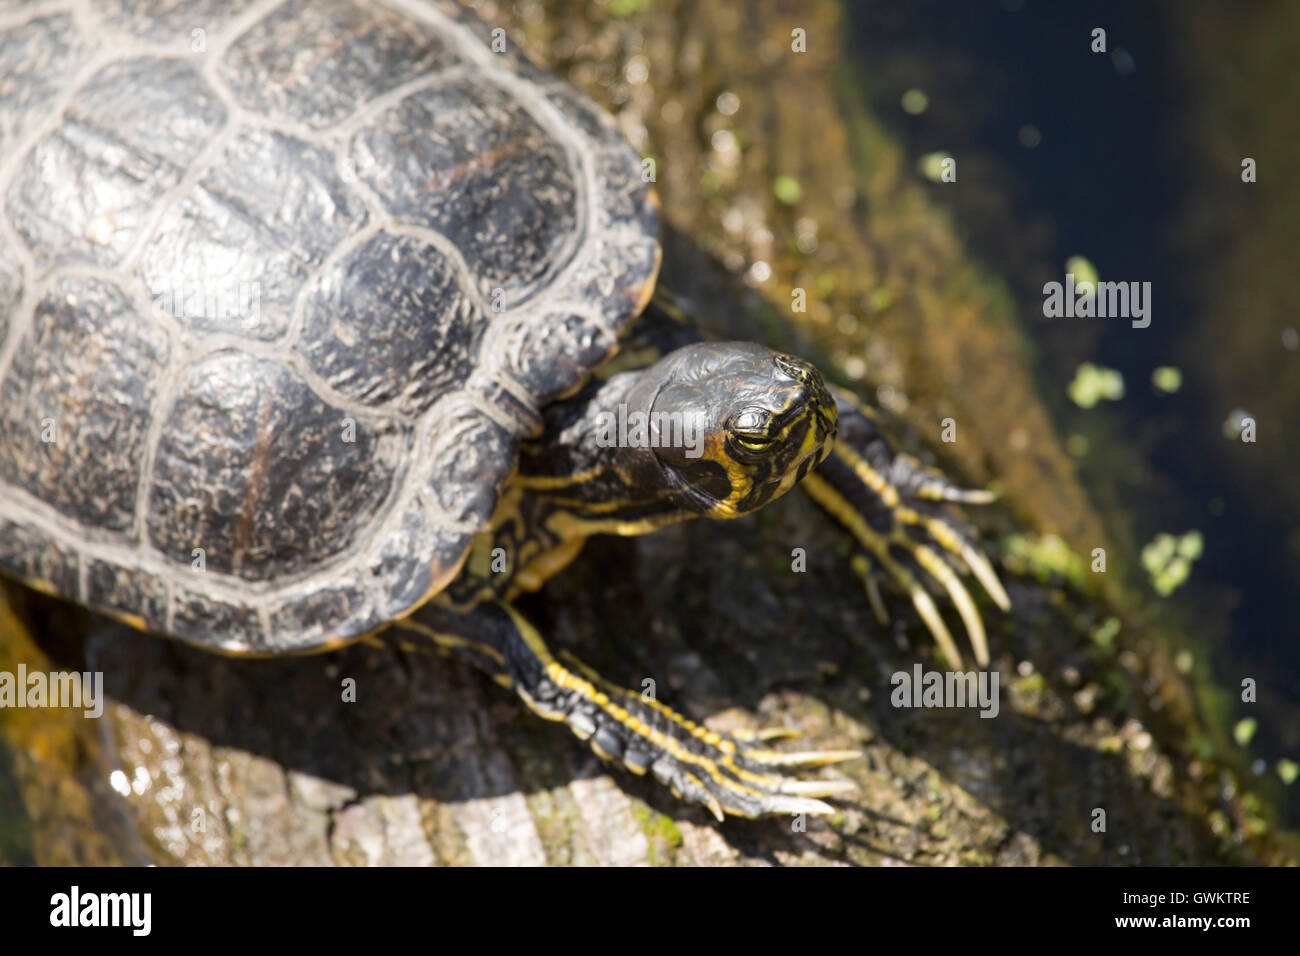 A European pond turtle (Emys orbicularis) in a canal in Schiedam, the Netherlands. Stock Photo